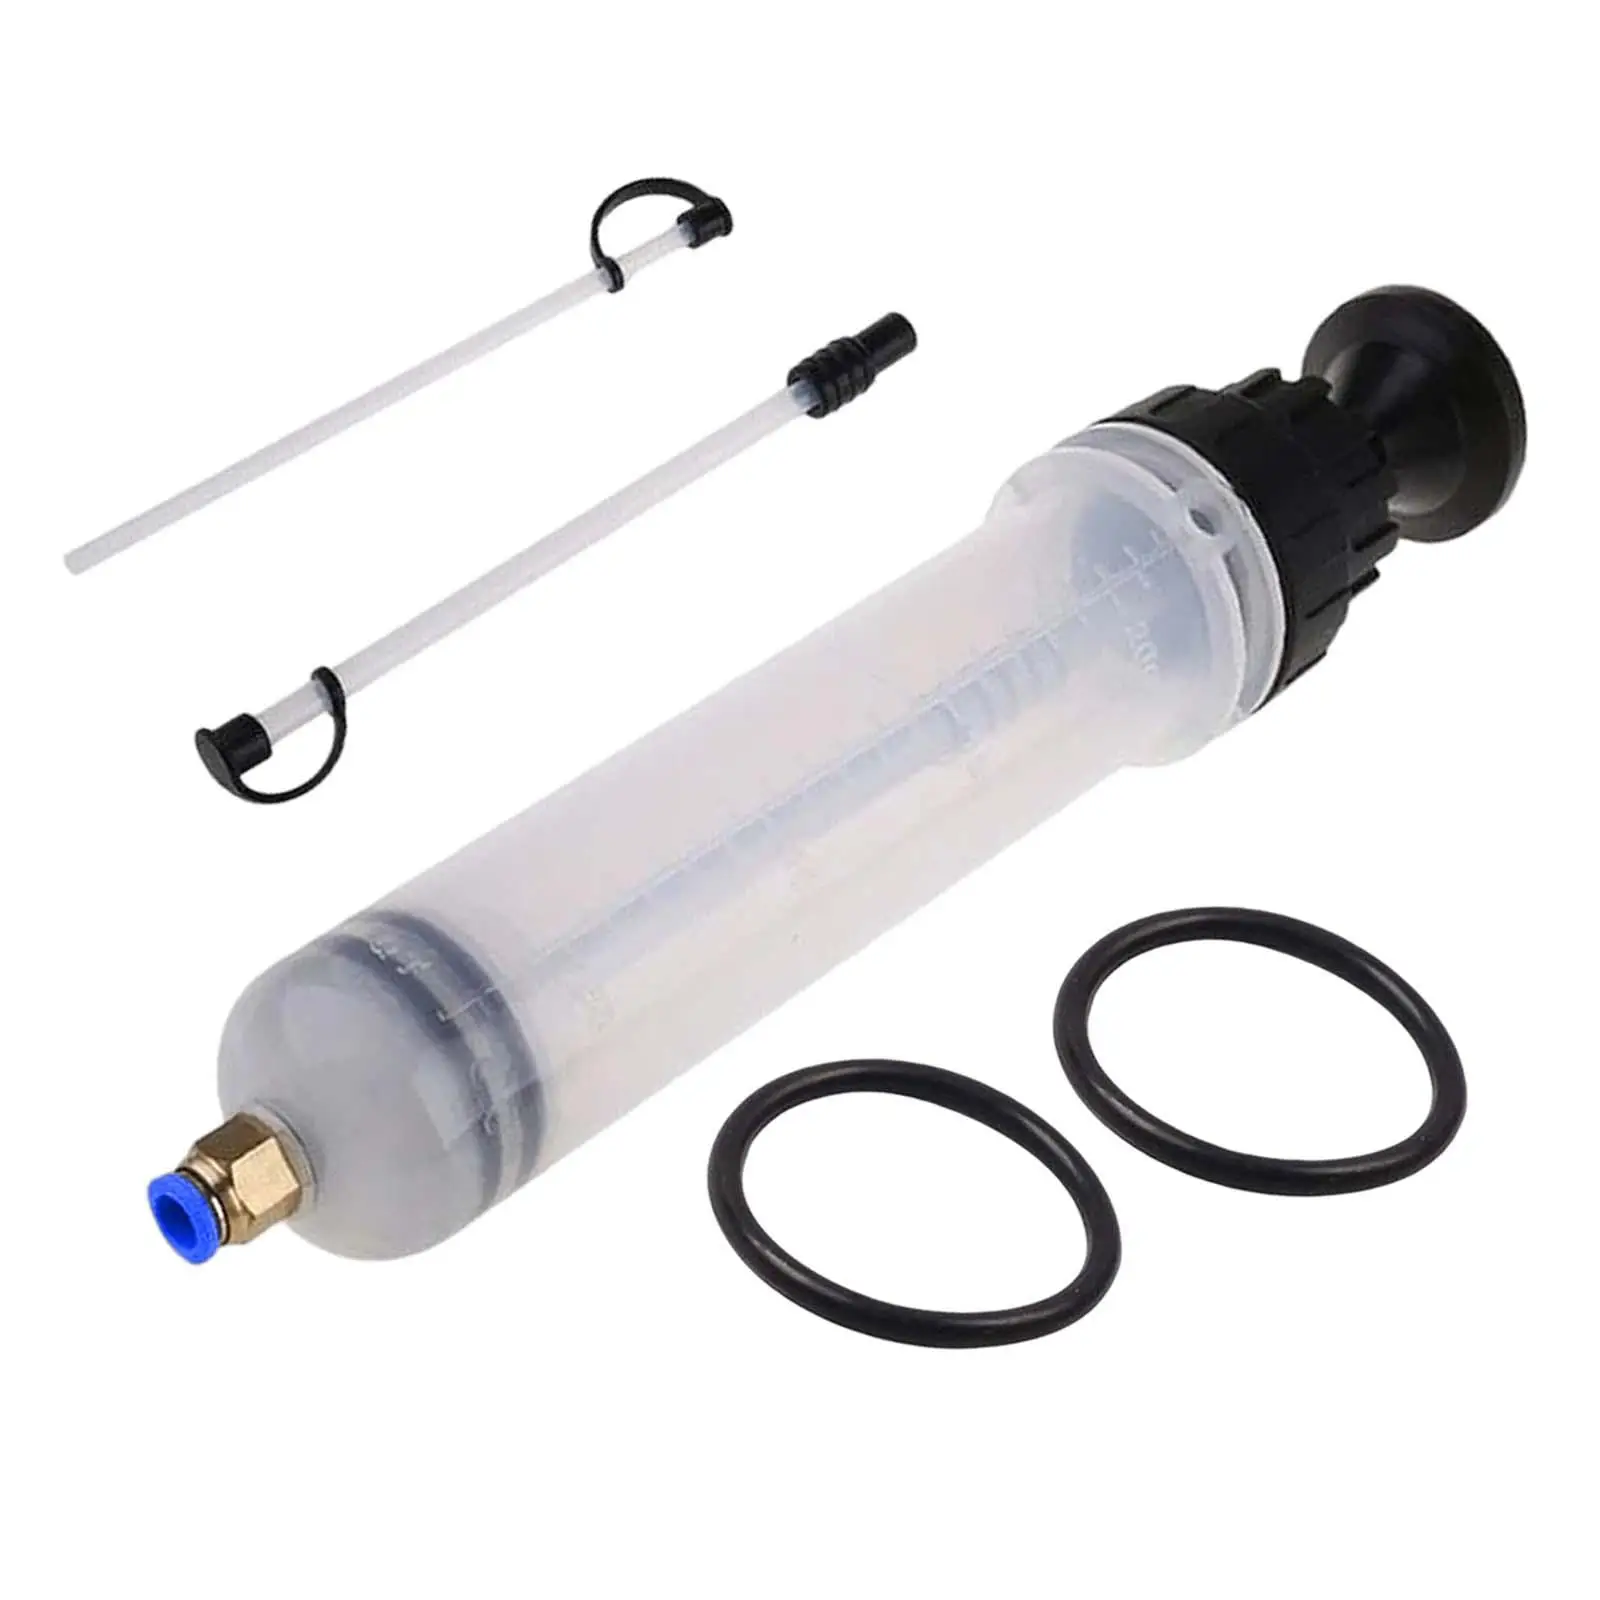 Automotive Brake Fluid Extractor Fluid Extraction Tool for Motorcycle